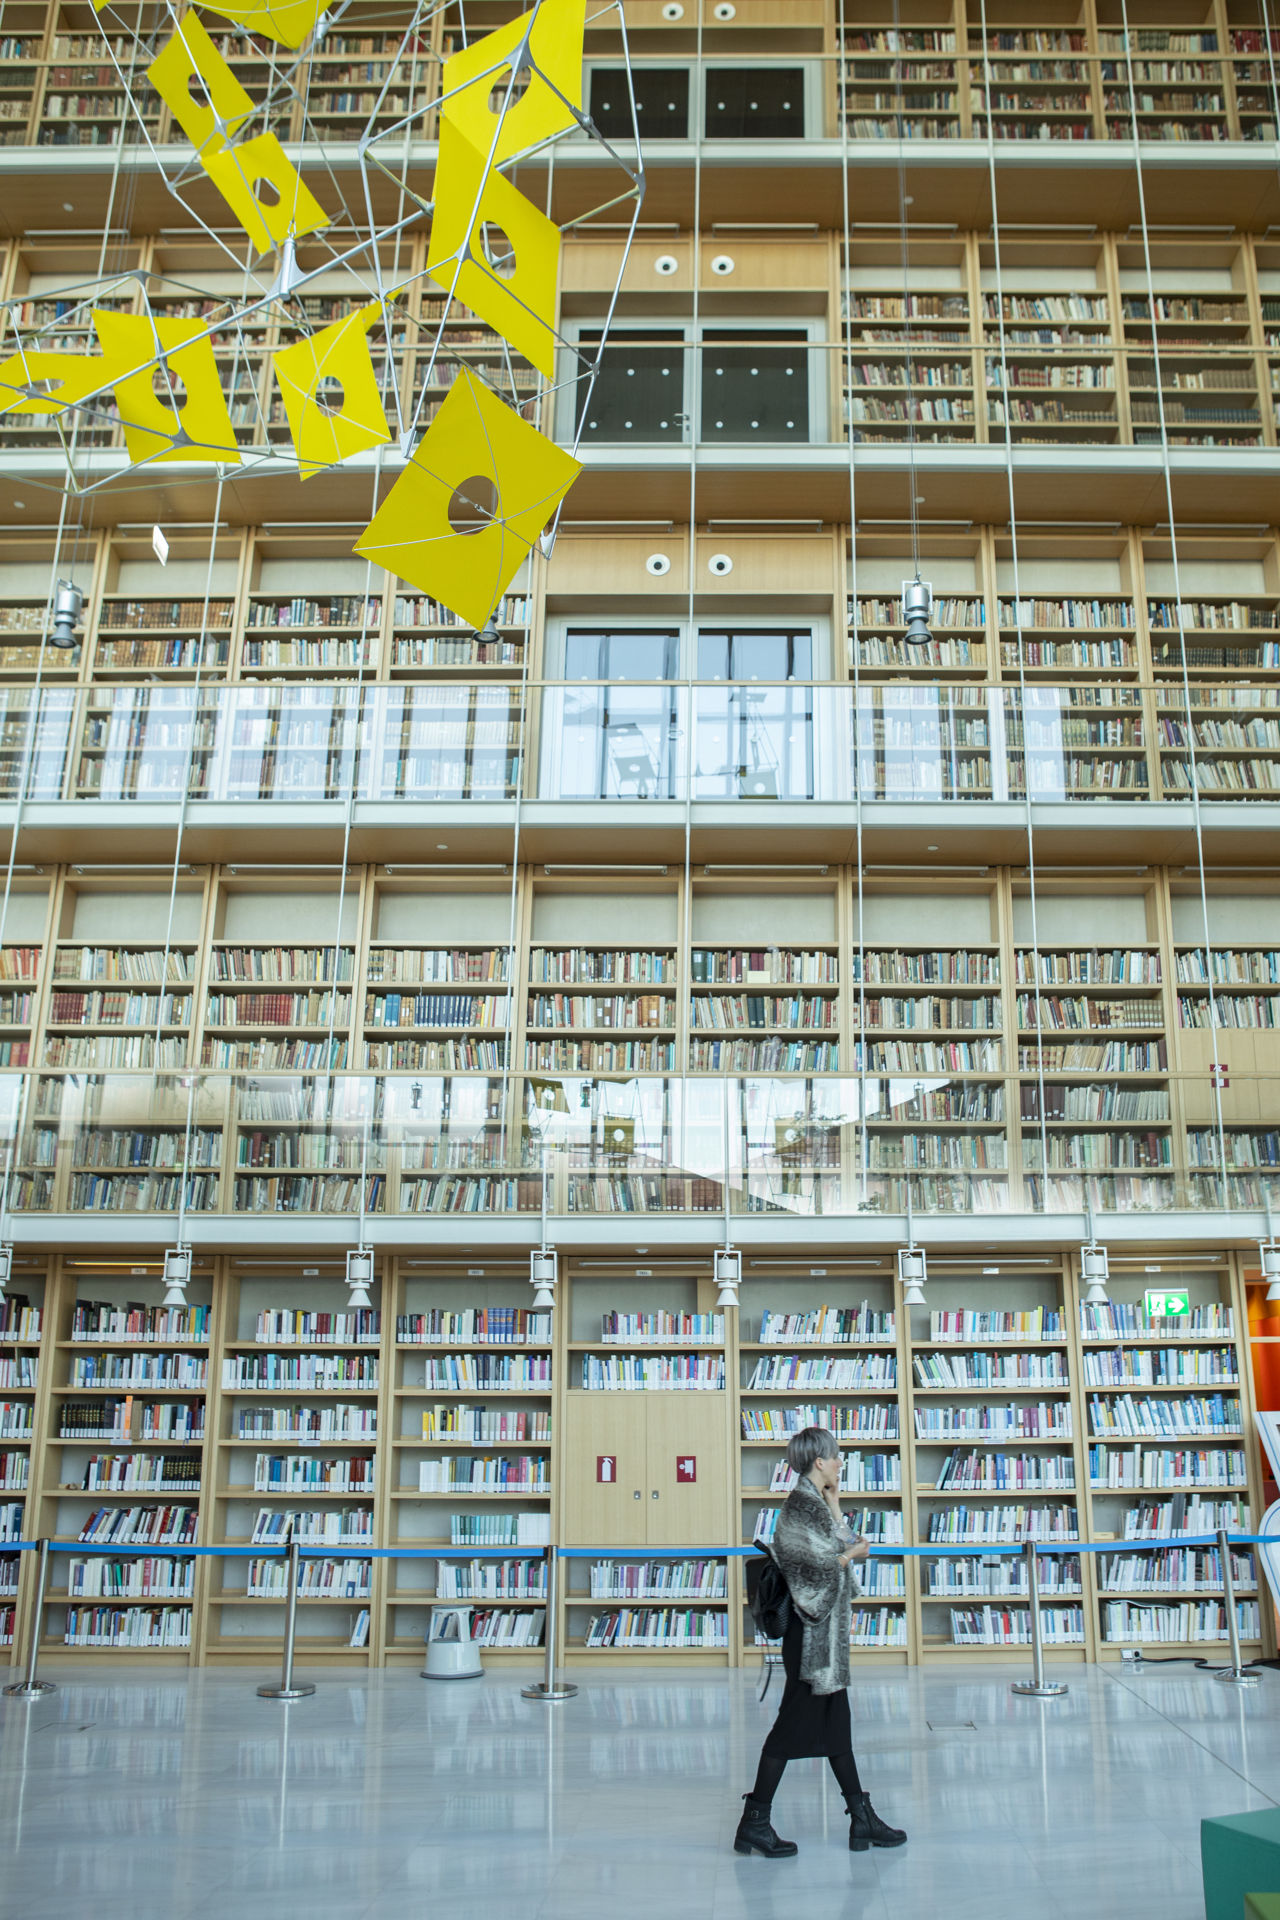 The Stavros Niarchos Foundation Library